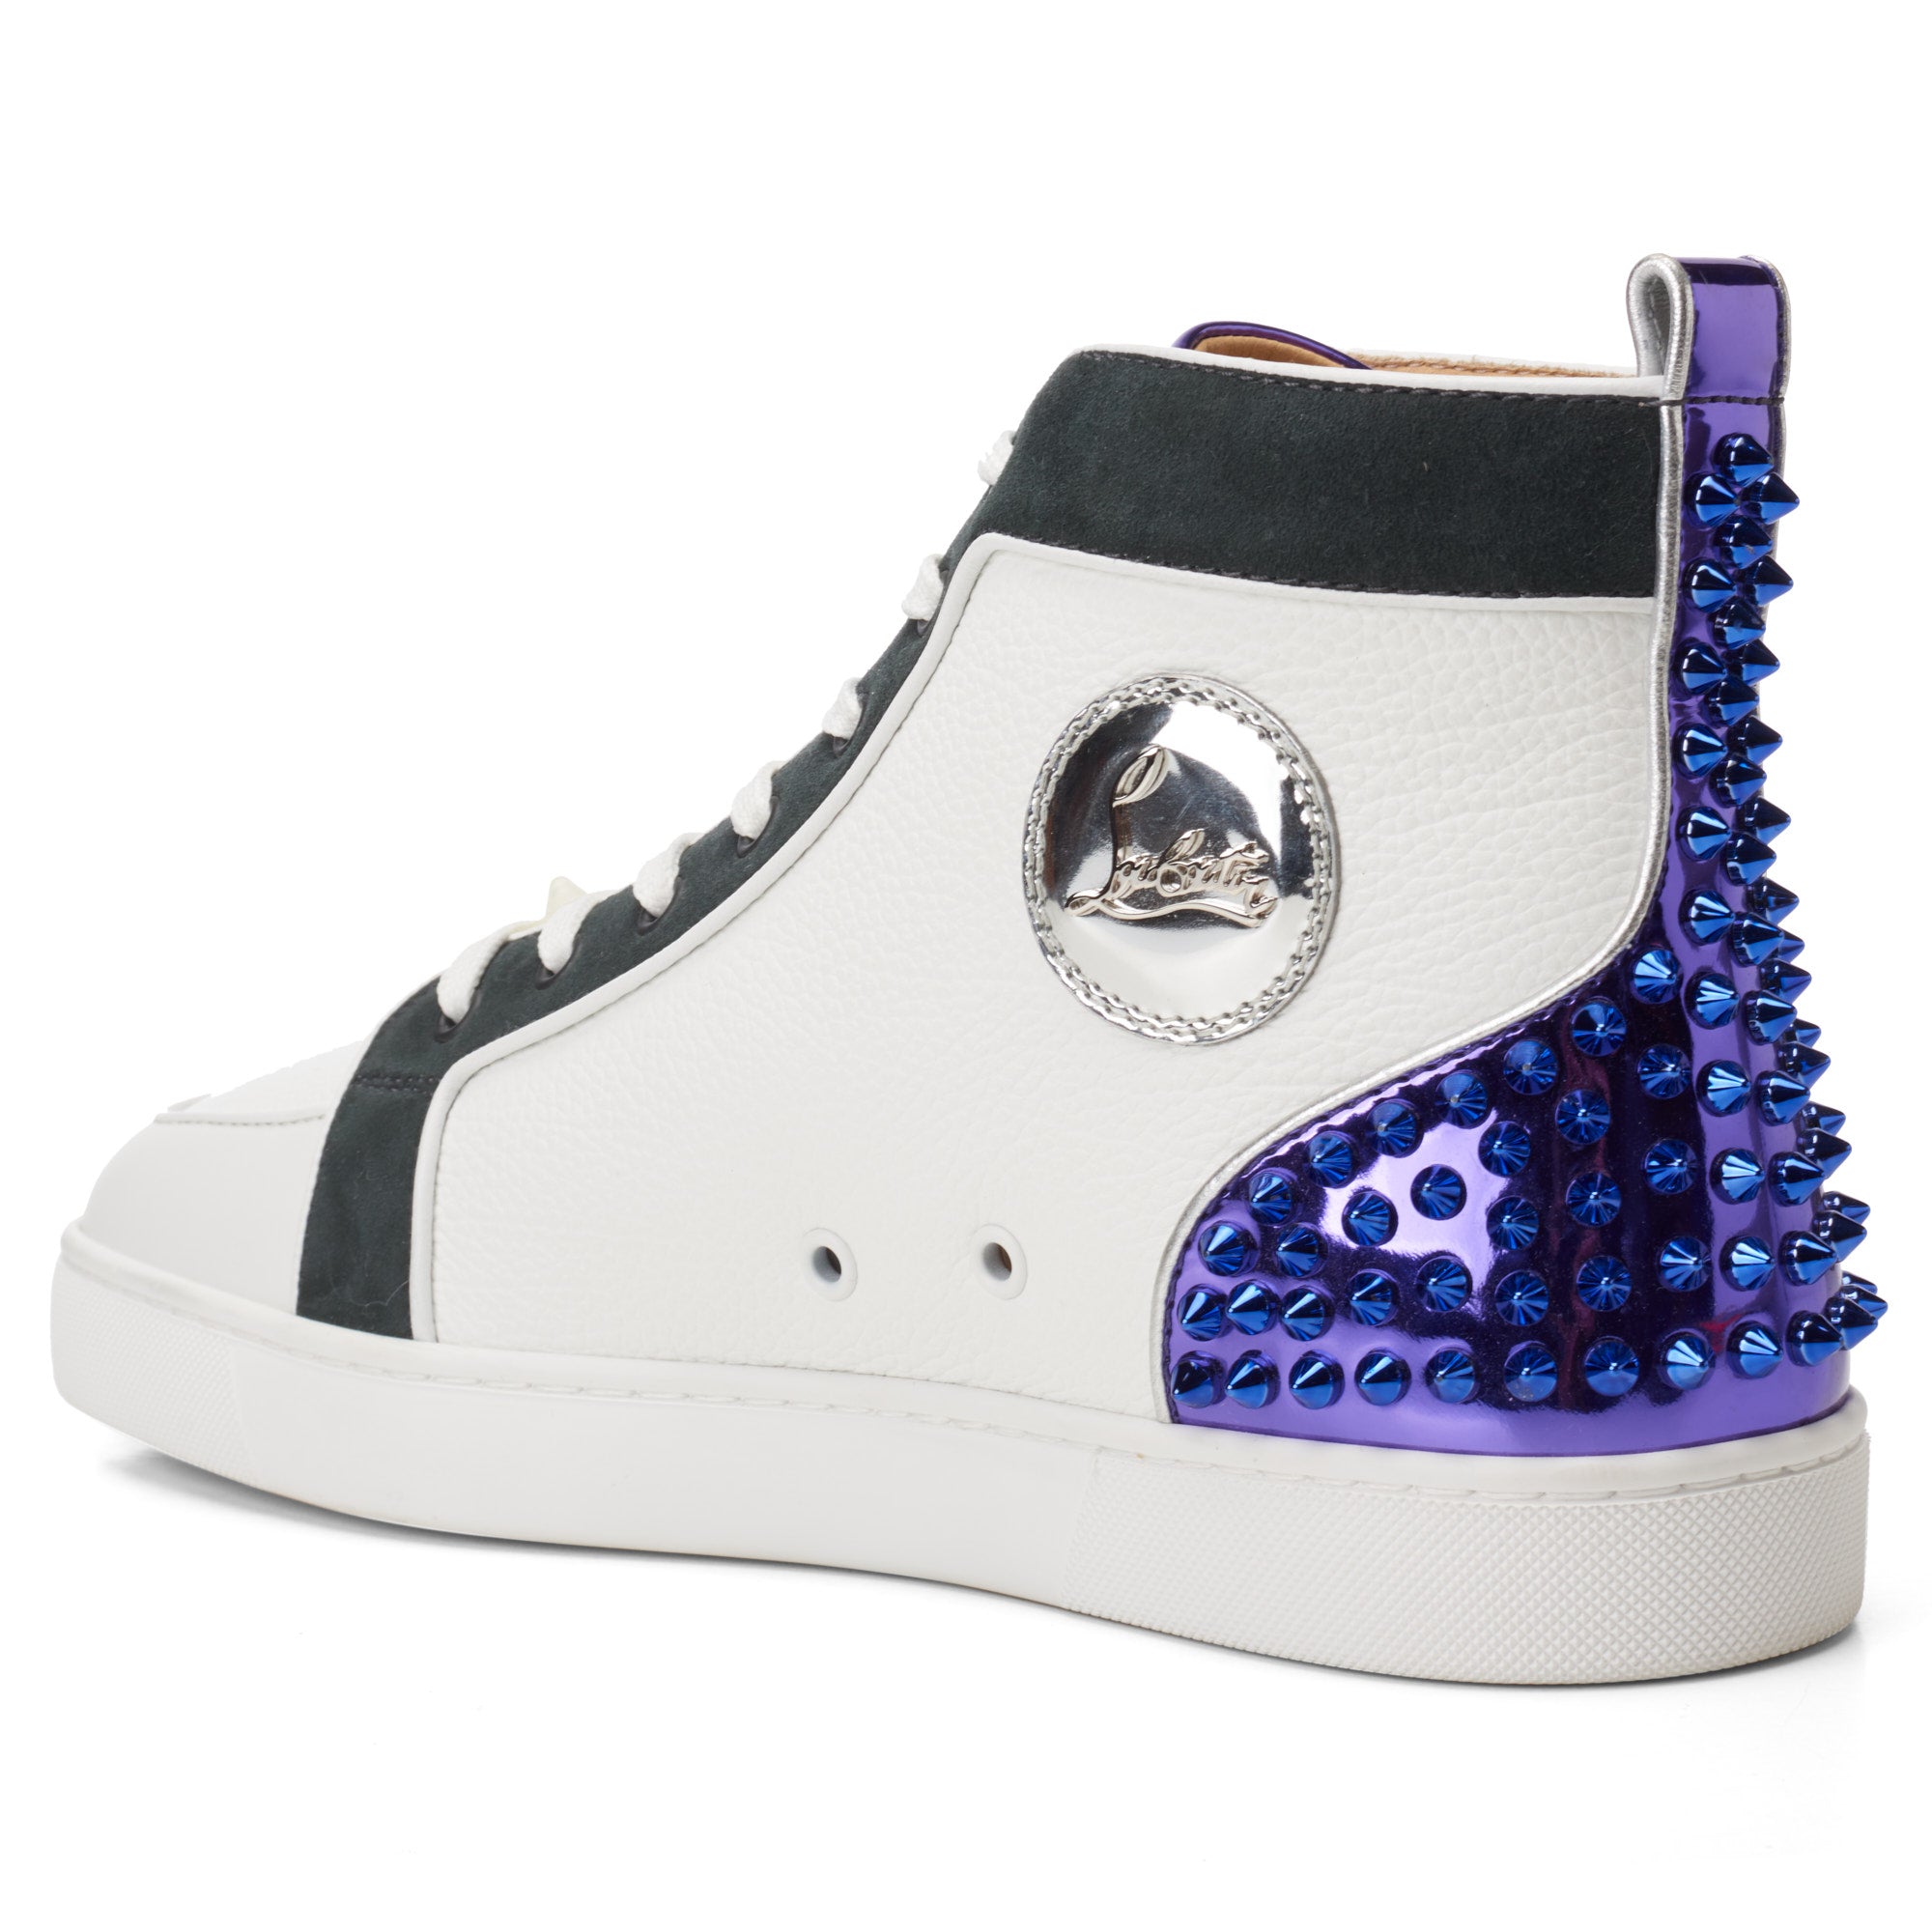 Christian Louboutin Spike High Top Sneakers Shoes Silver EU 42 1/2 From  Japan